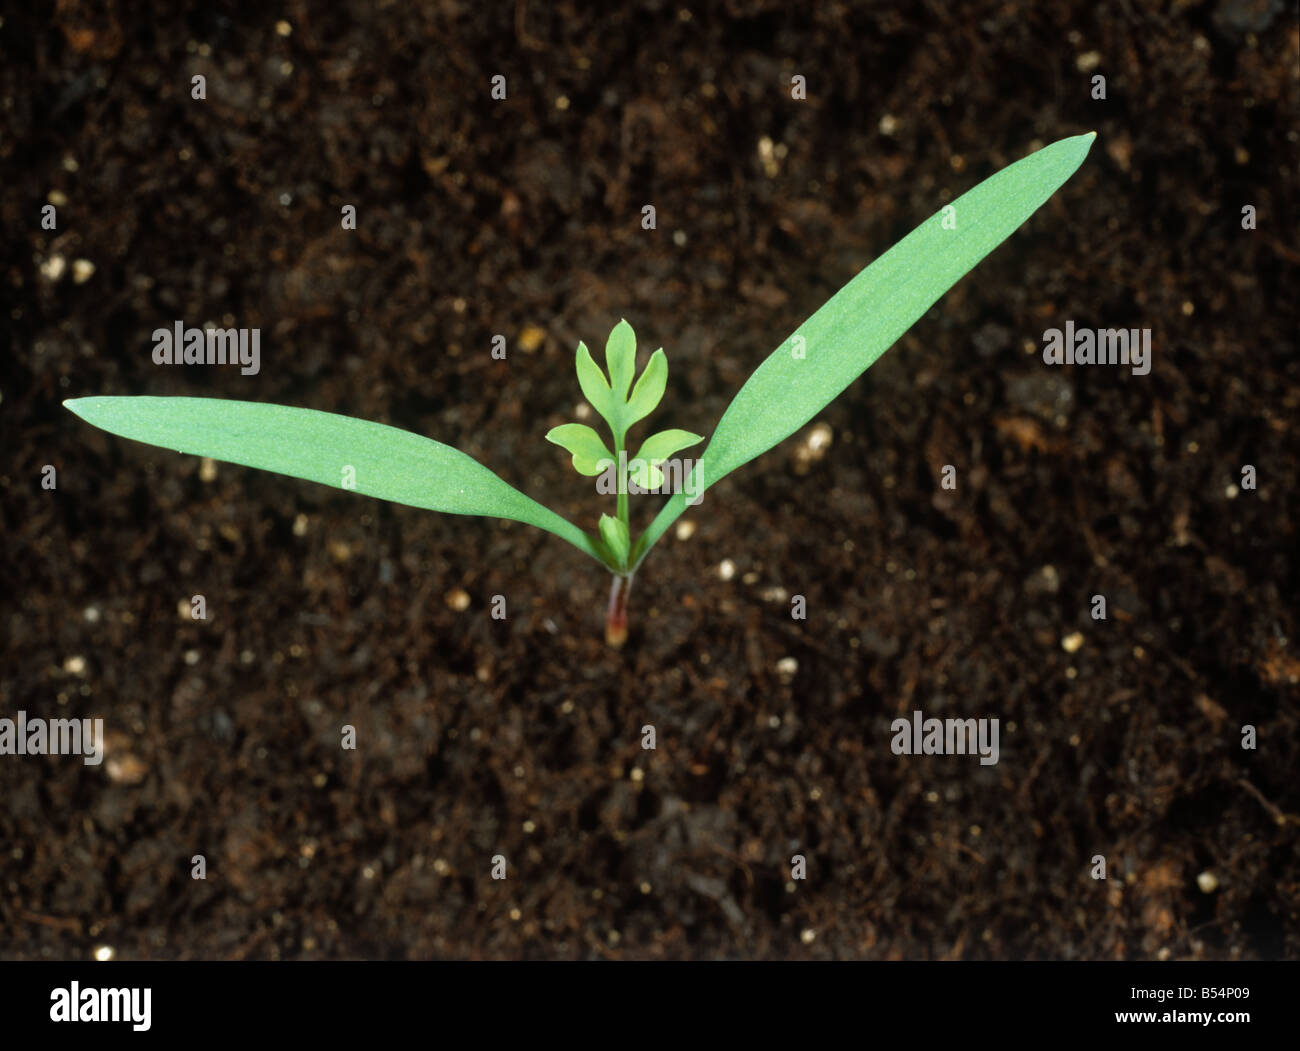 Fumitory Fumaria officinalis seedling with first true leaves emerging Stock Photo